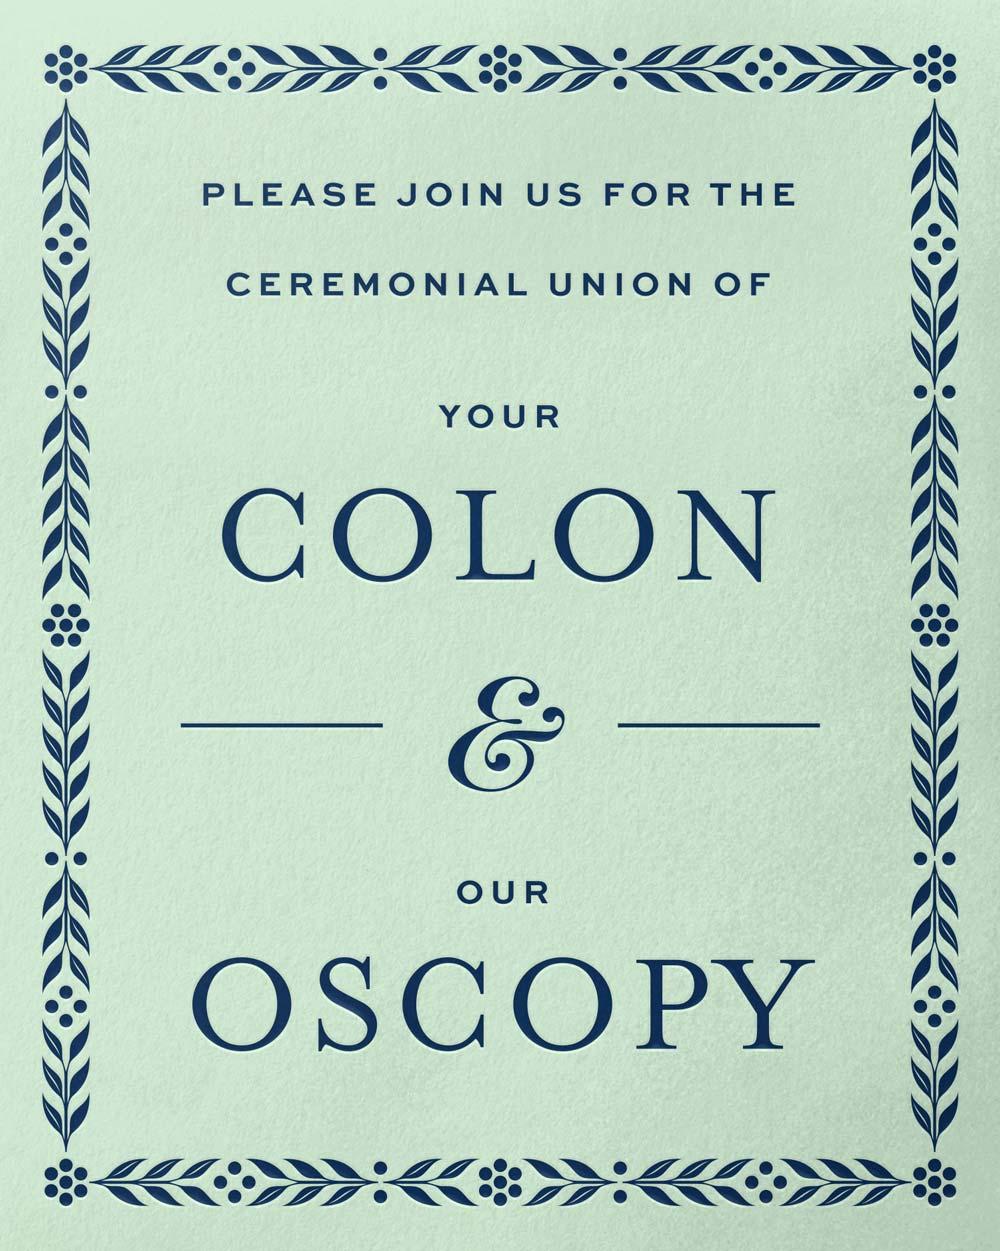 Please join us for the ceremonial union of Your Colon & Our Oscopy